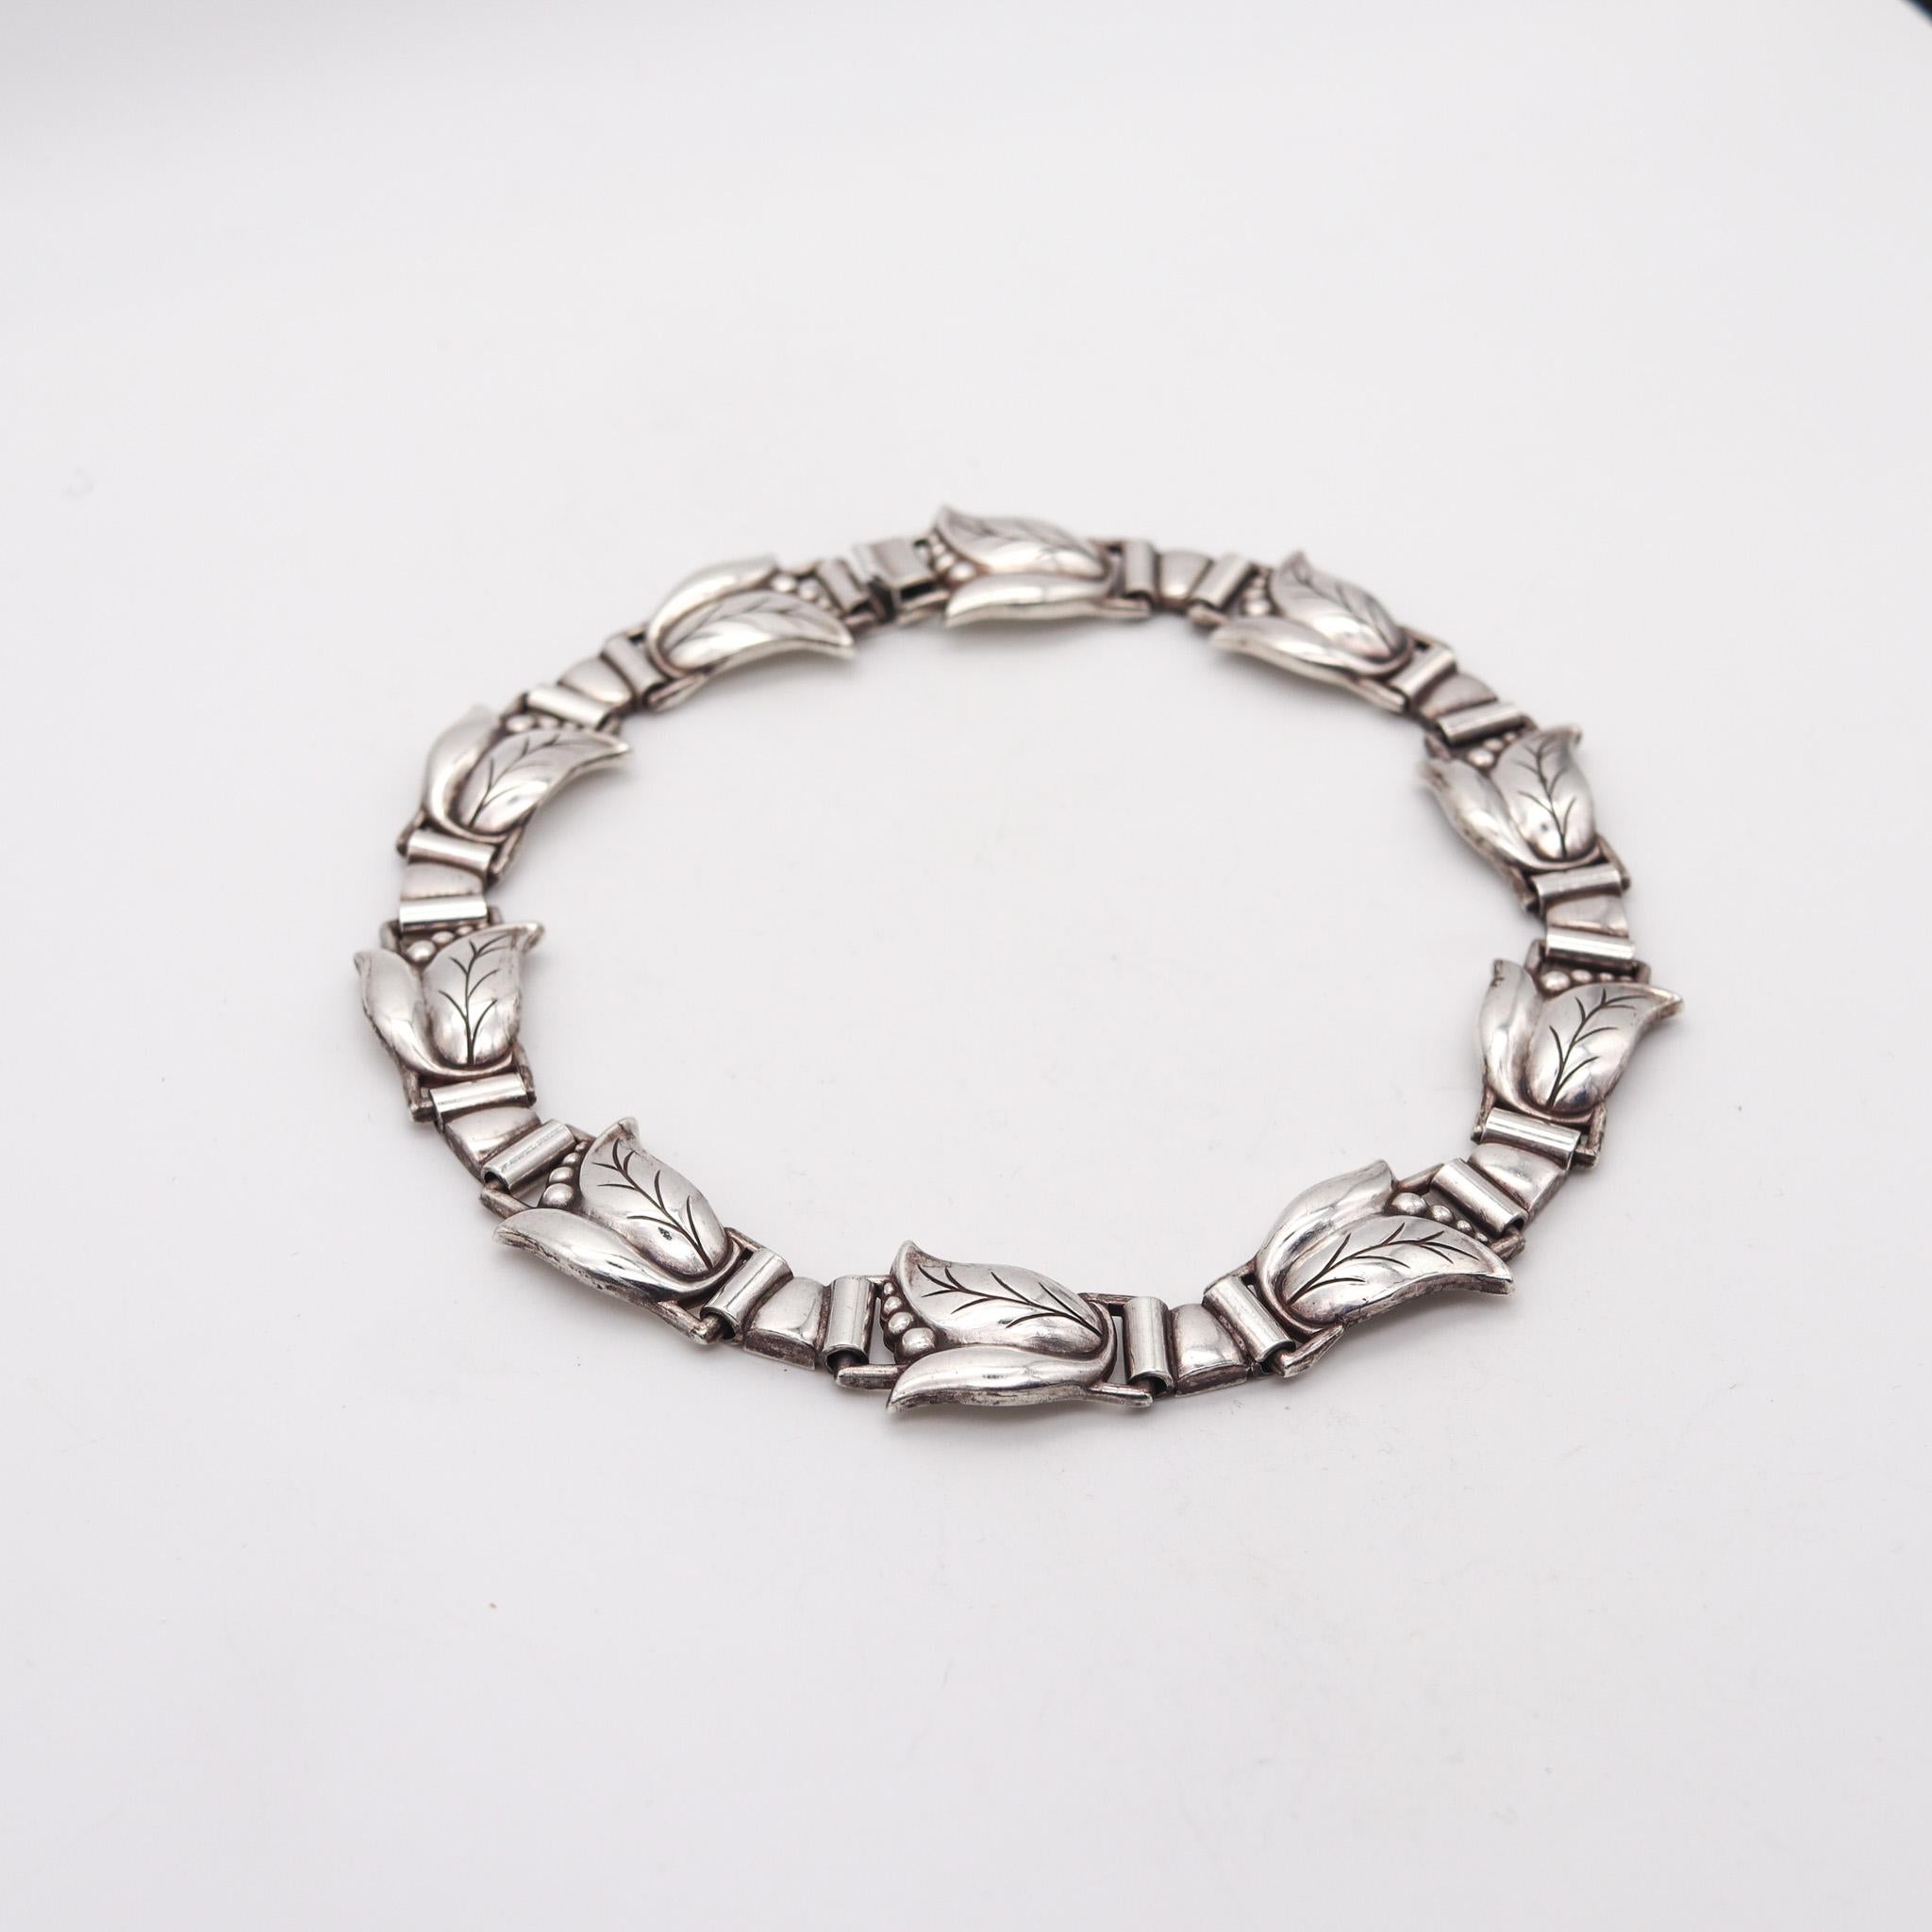 Art deco necklace designed by Alphonse La Paglia for Georg Jensen.

This is a beautiful vintage necklace, created by the silversmith and designer Alphonse La Paglia for the Georg Jensen company, back in the 1940. This necklace has been crafted in